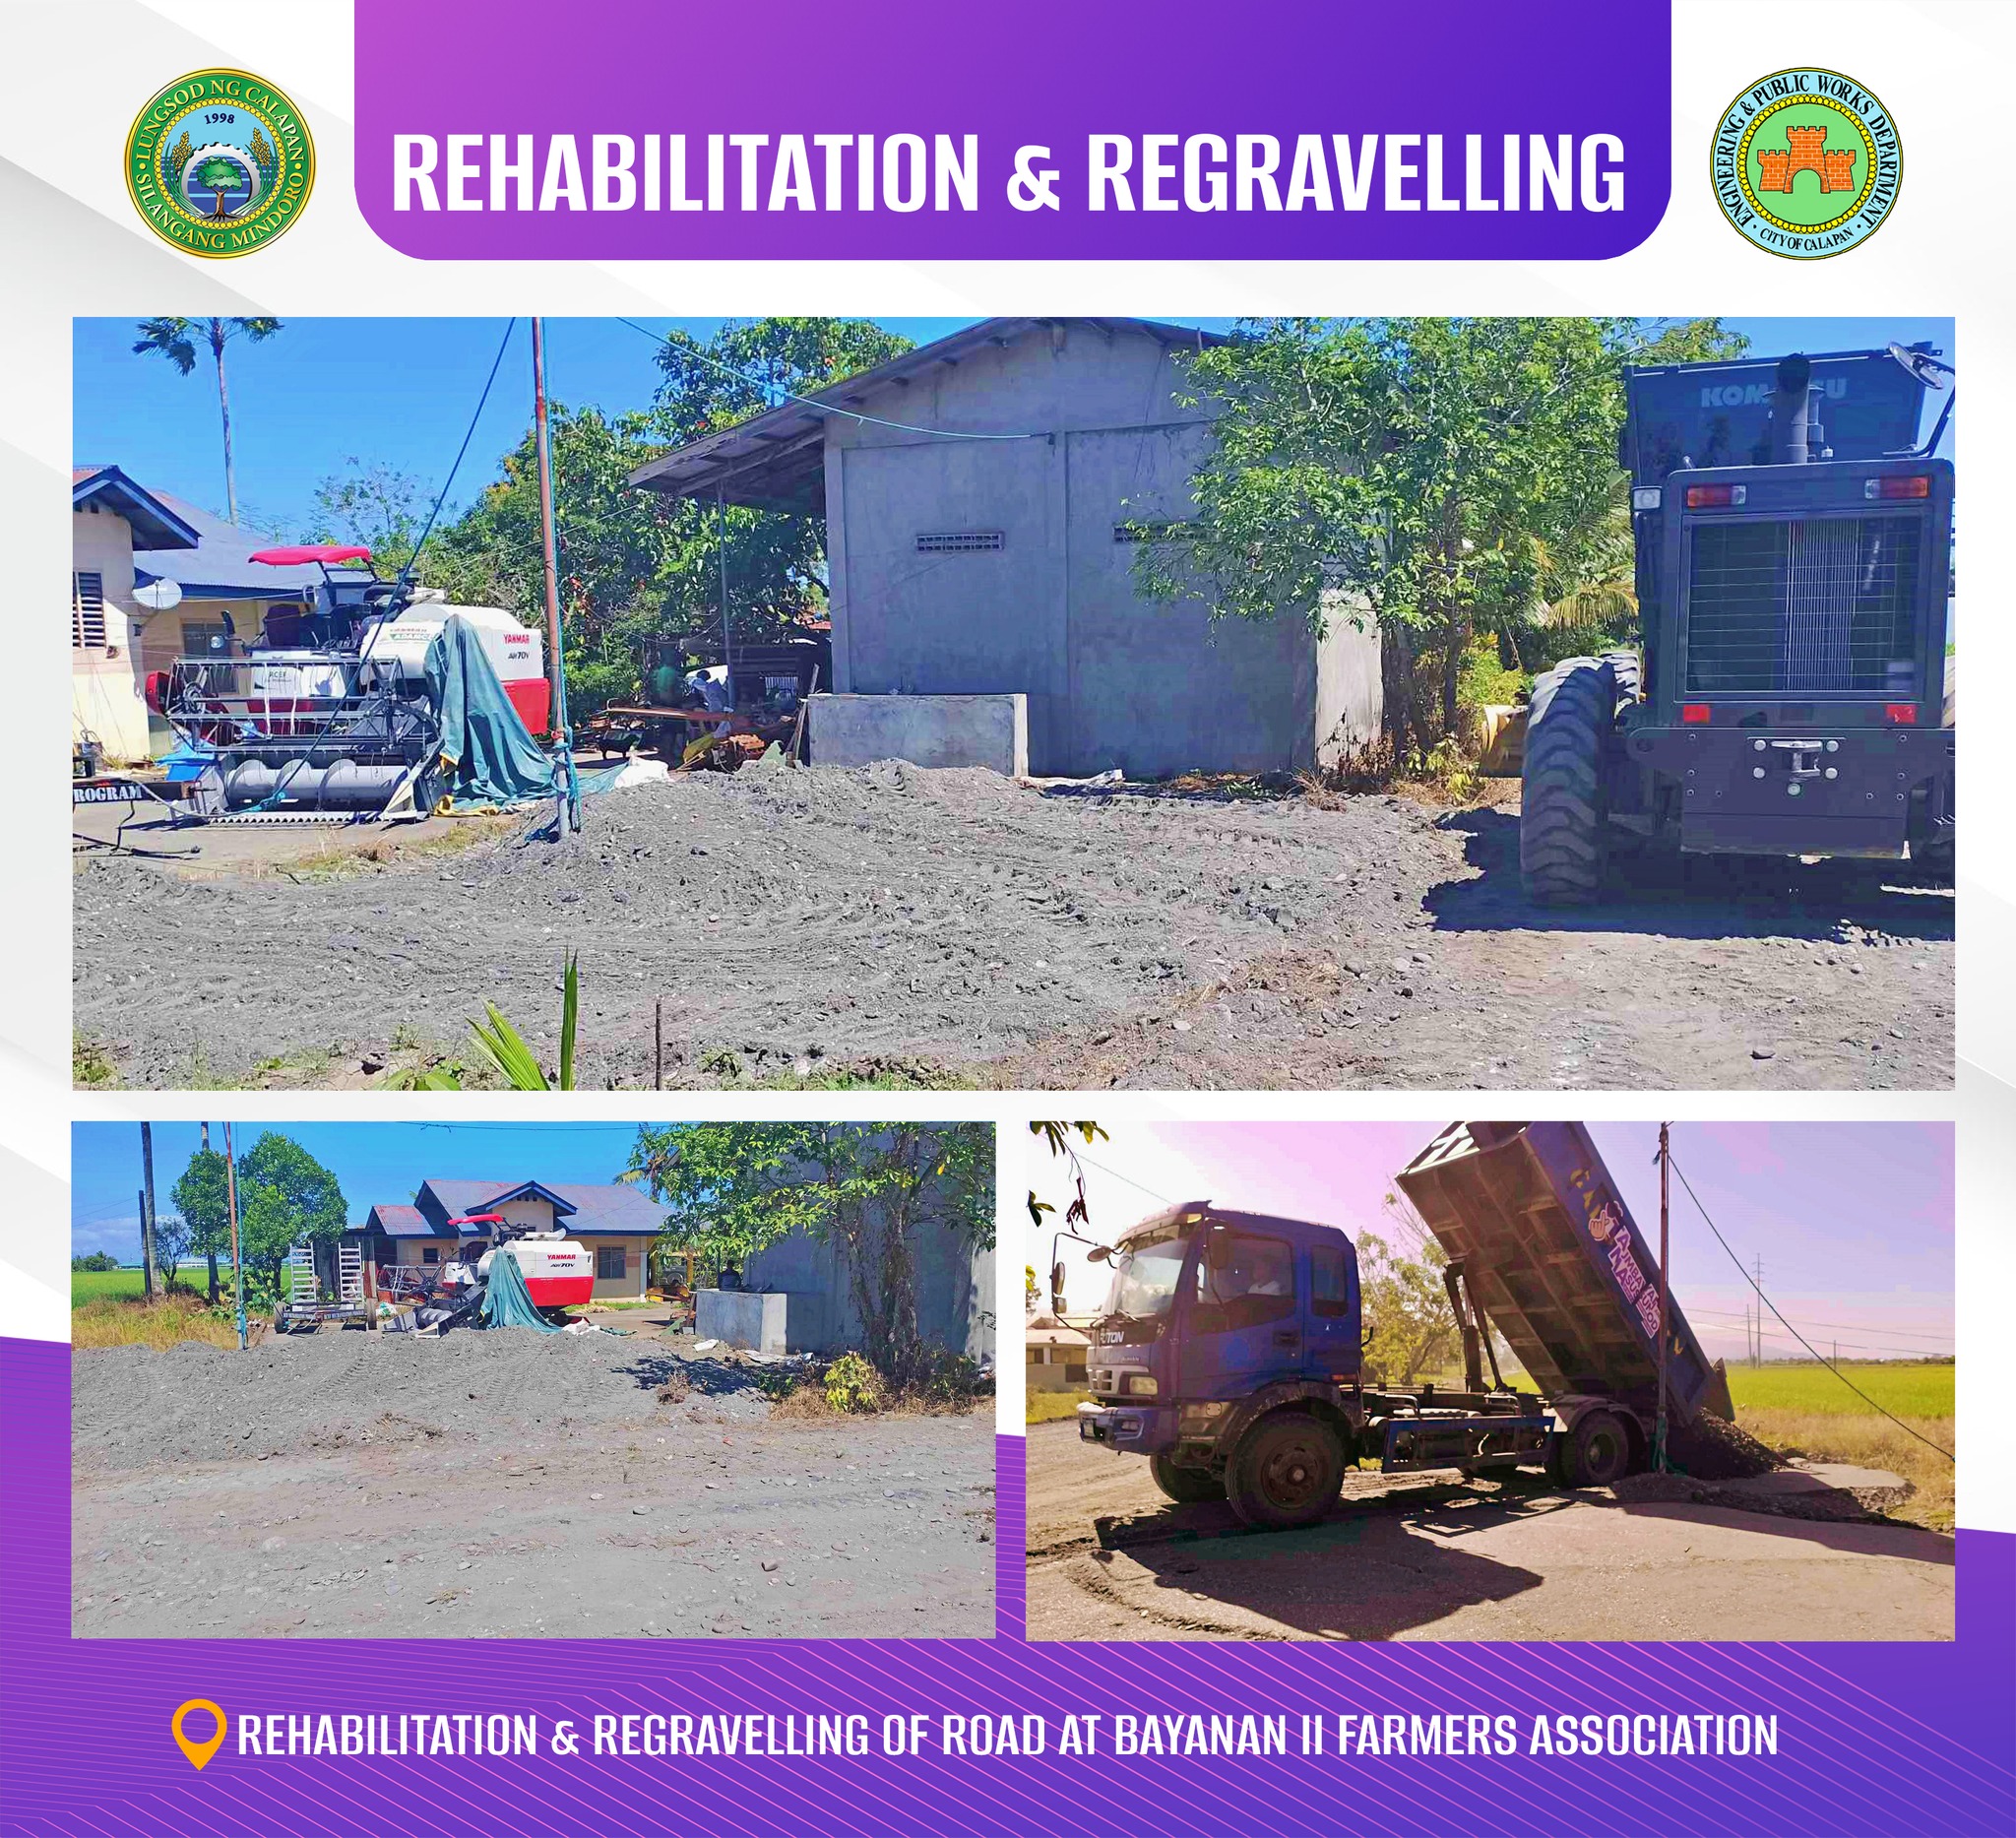 Rehabilitation and regravelling of roads